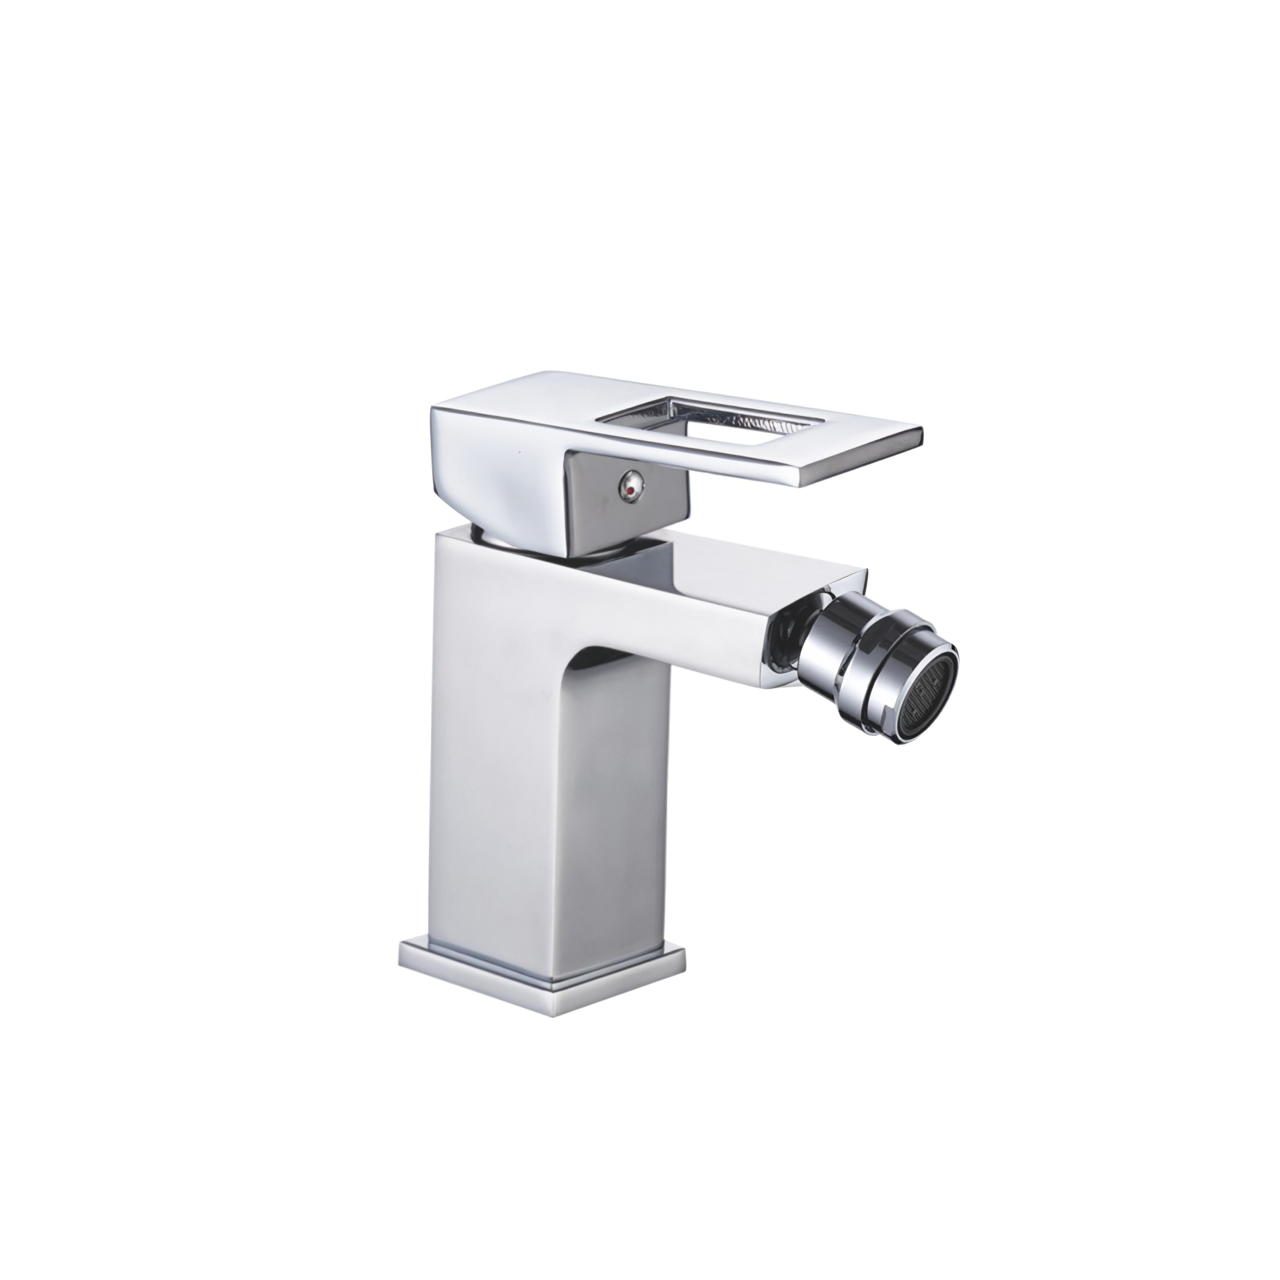 OJ-J2593H Square Faucet Safe Water Supply Lavatory Vessel Faucet for 1 Hole Bathroom Sink Faucet Deck Mounted Stainless Steel Basin Faucet